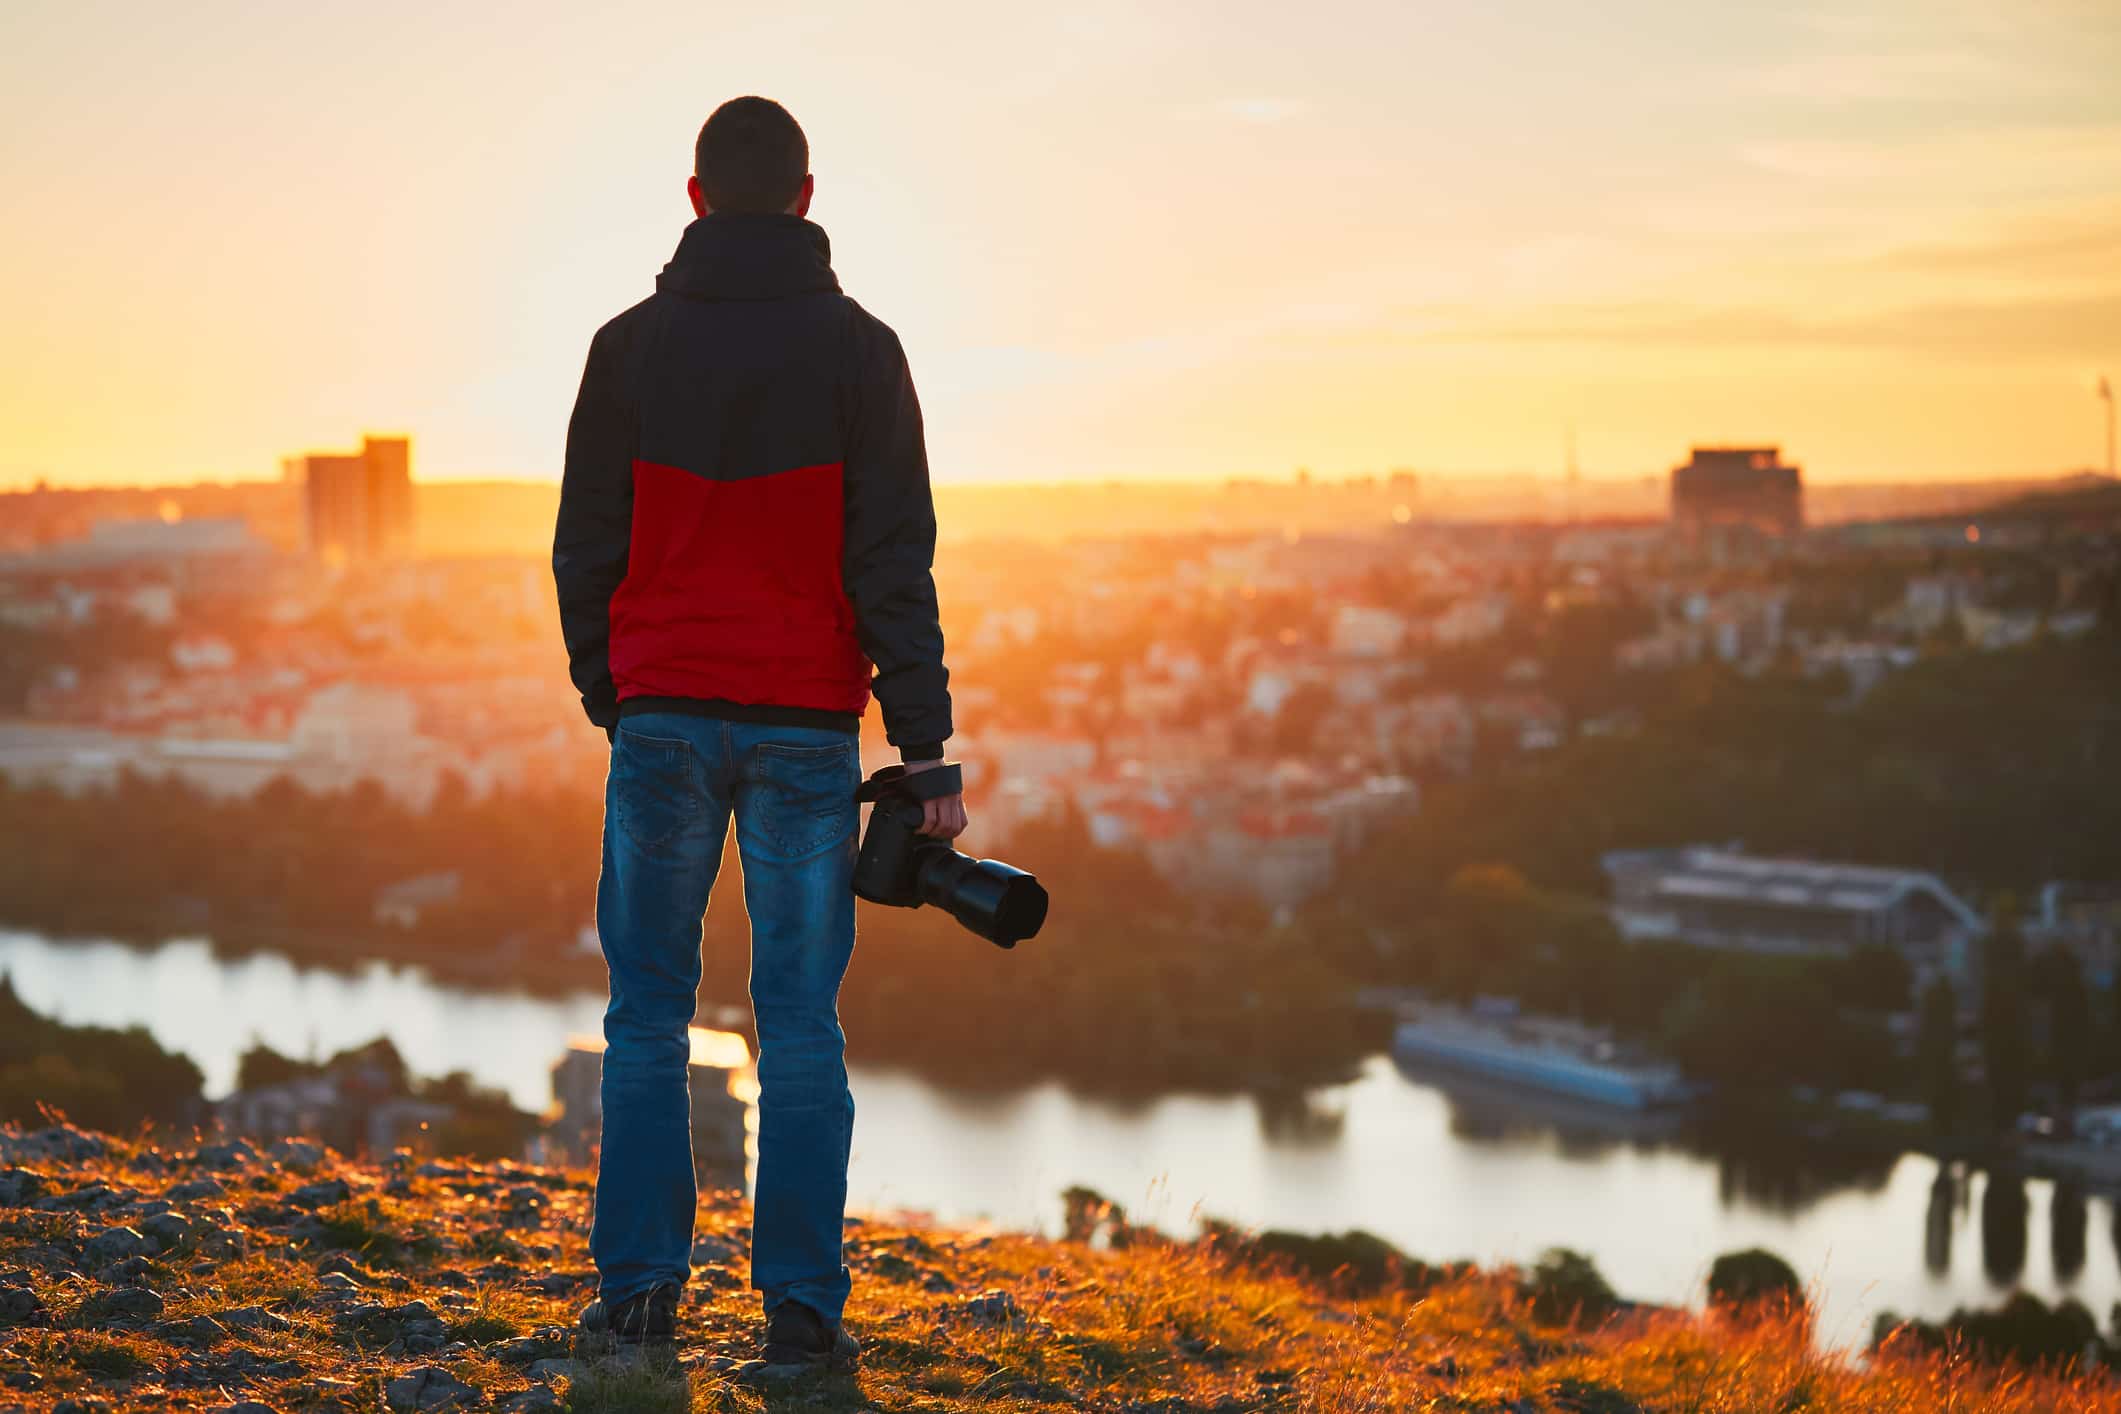 How to Become a Better Photographer Without Taking Pictures